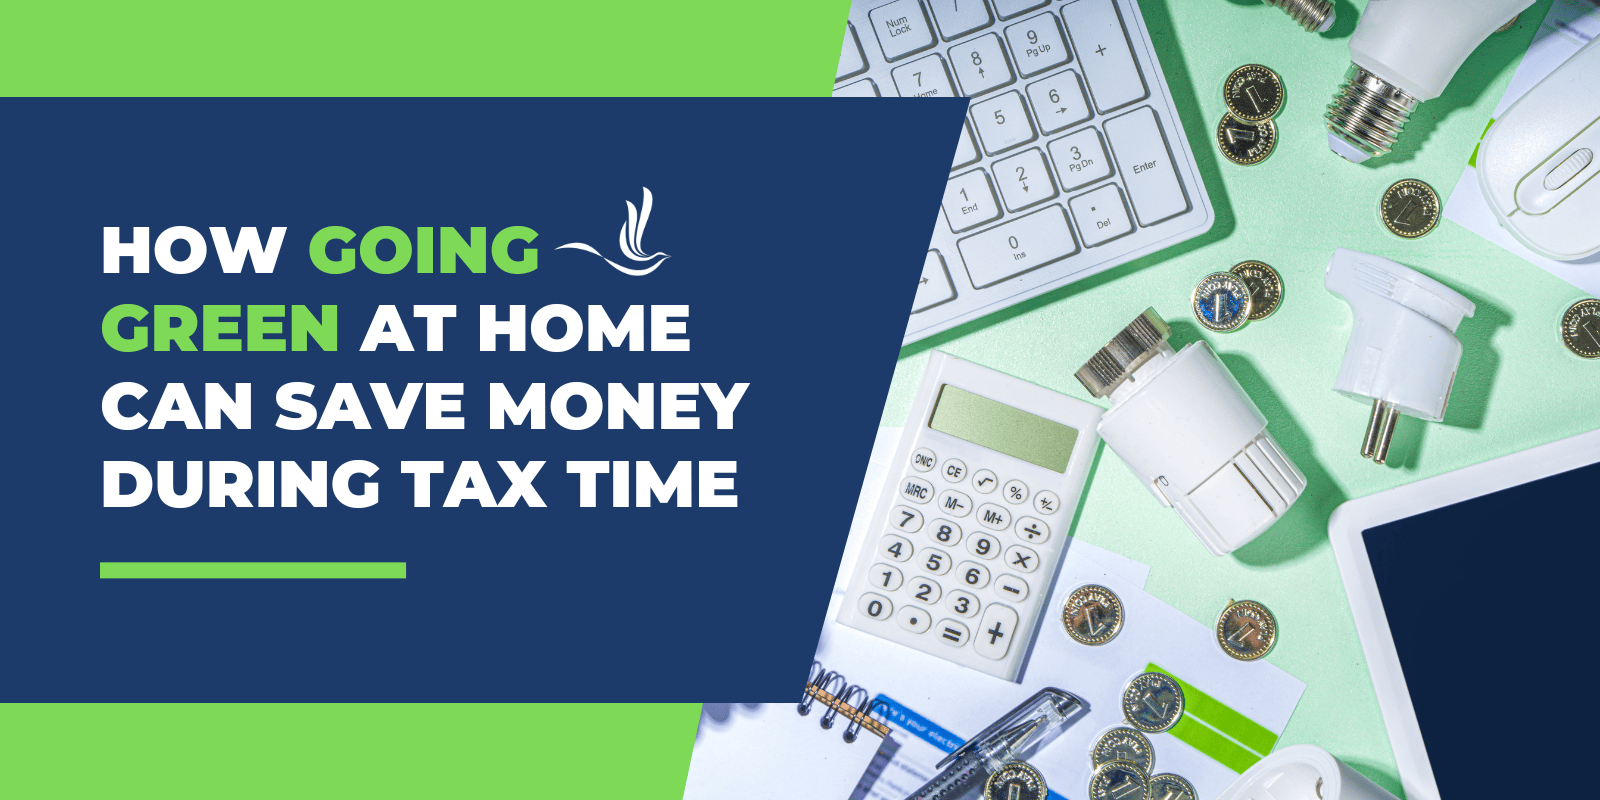 how going green at home can save money during tax time